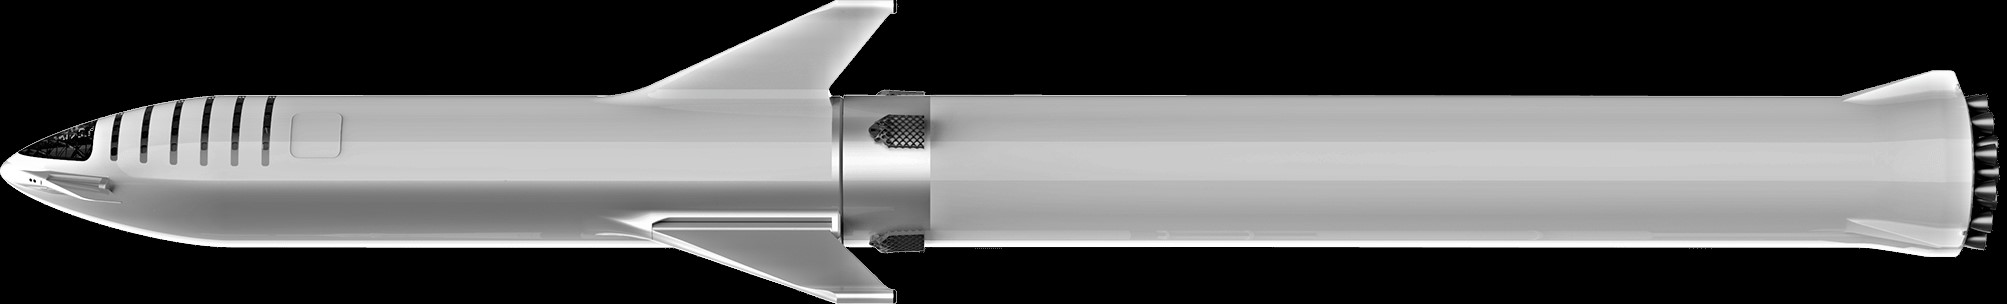 BFR booster and spaceship overview (SpaceX)